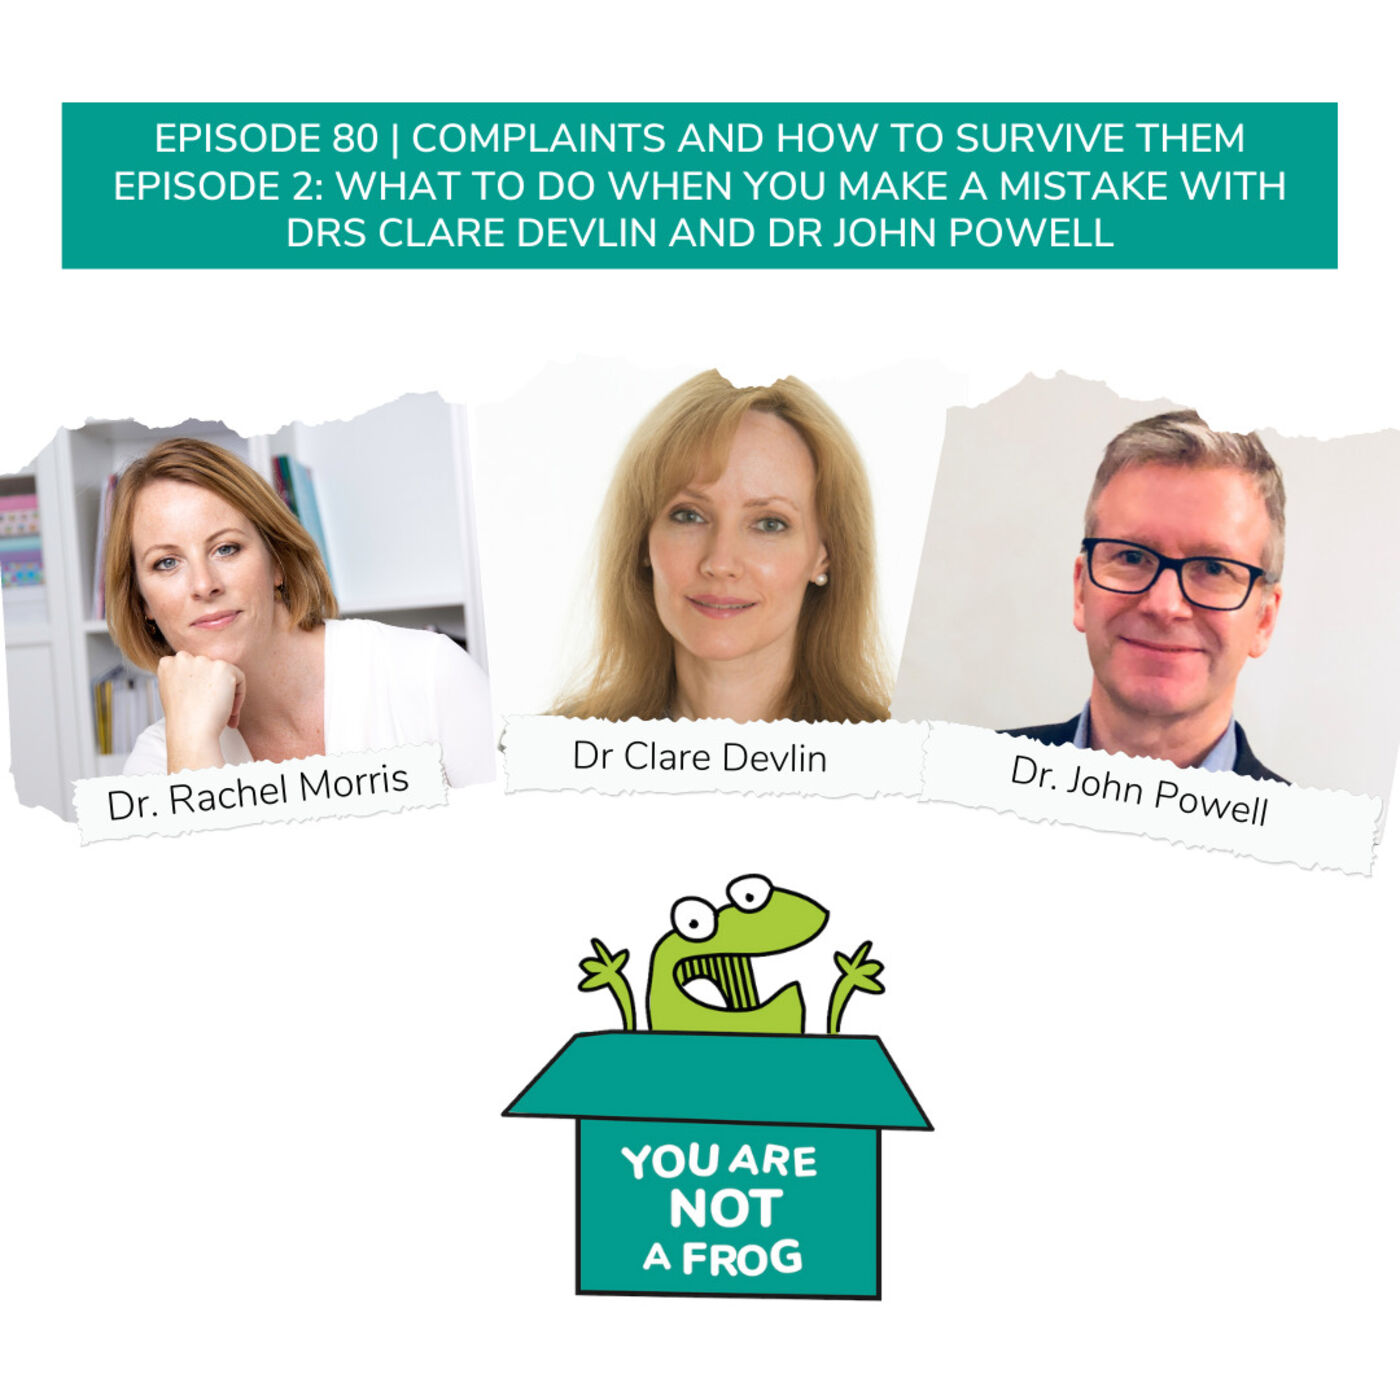 Complaints and How to Survive Them E2: What to Do When You Make a Mistake with Drs Clare Devlin and Dr John Powell